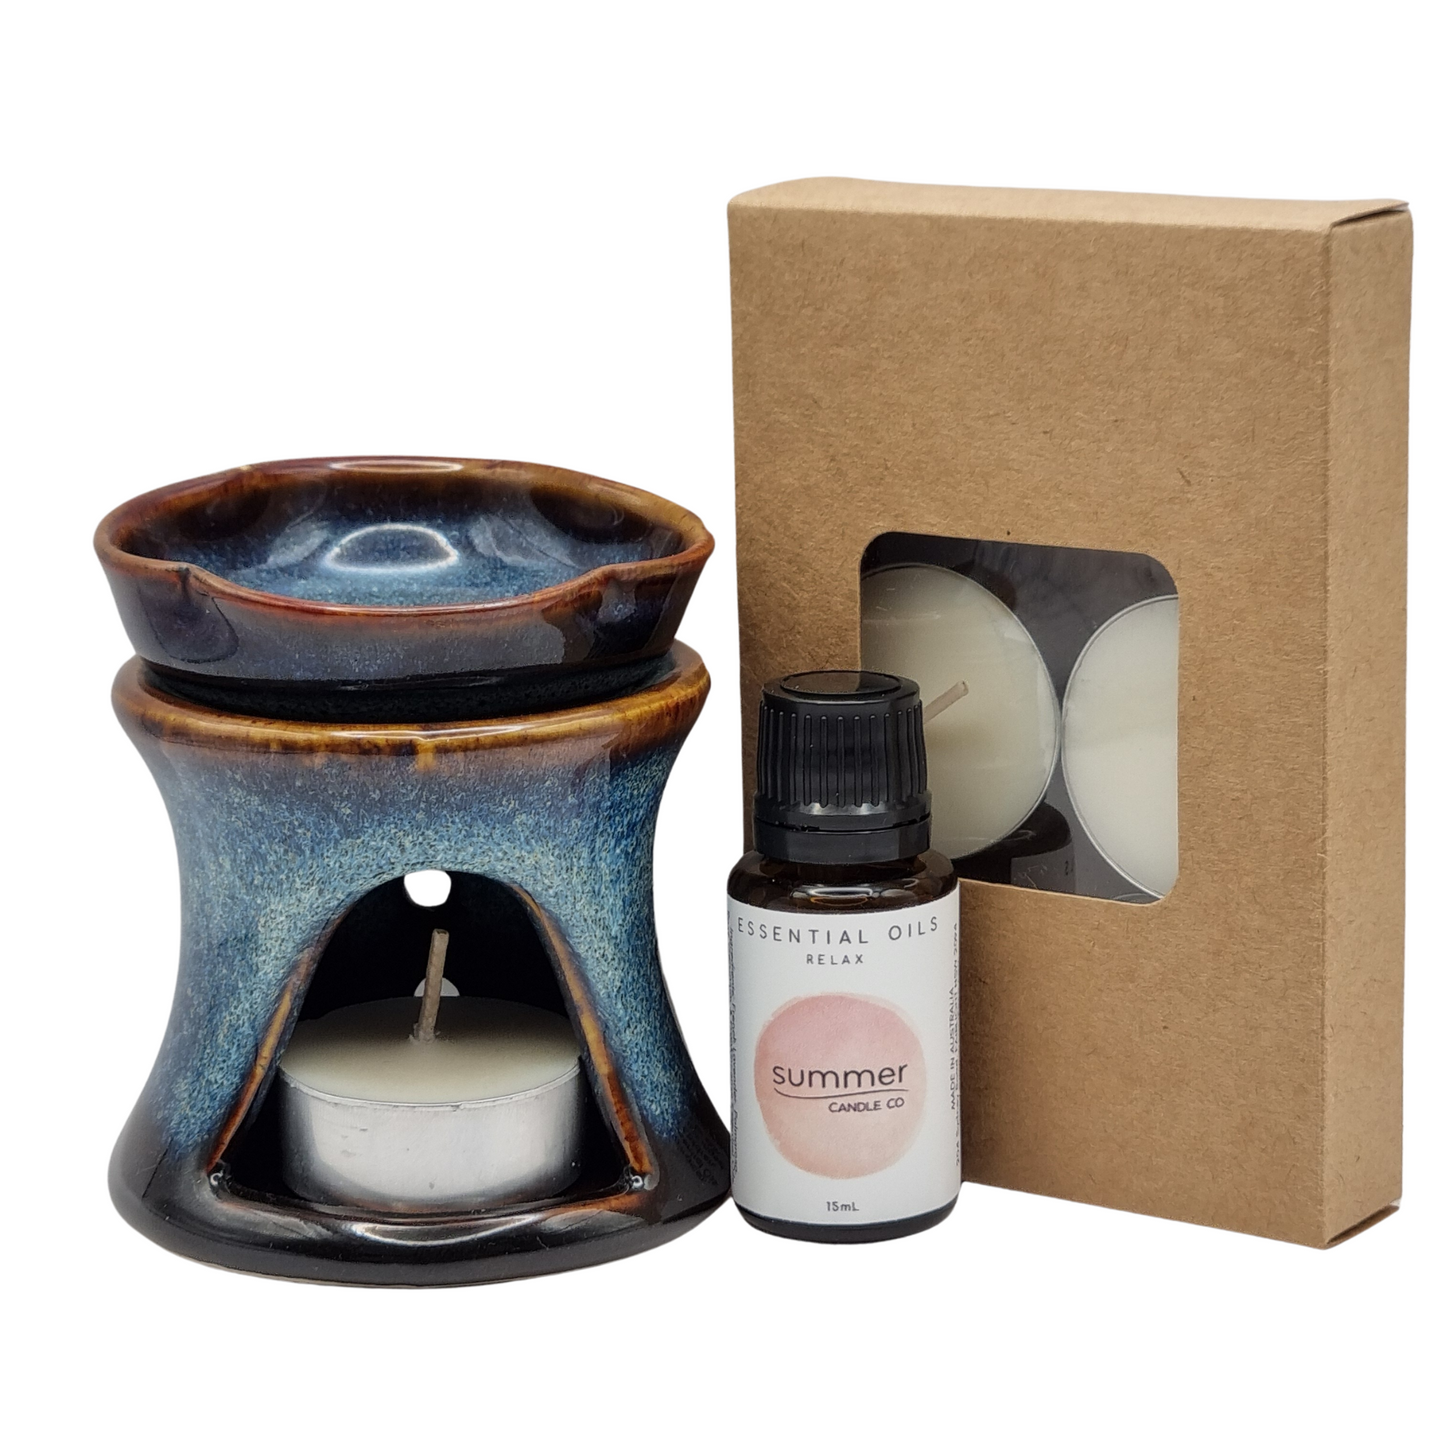 Bundle Pack Ceramic Blue Oil Burner with Relax Essential Oil and 6 pack of Tealights